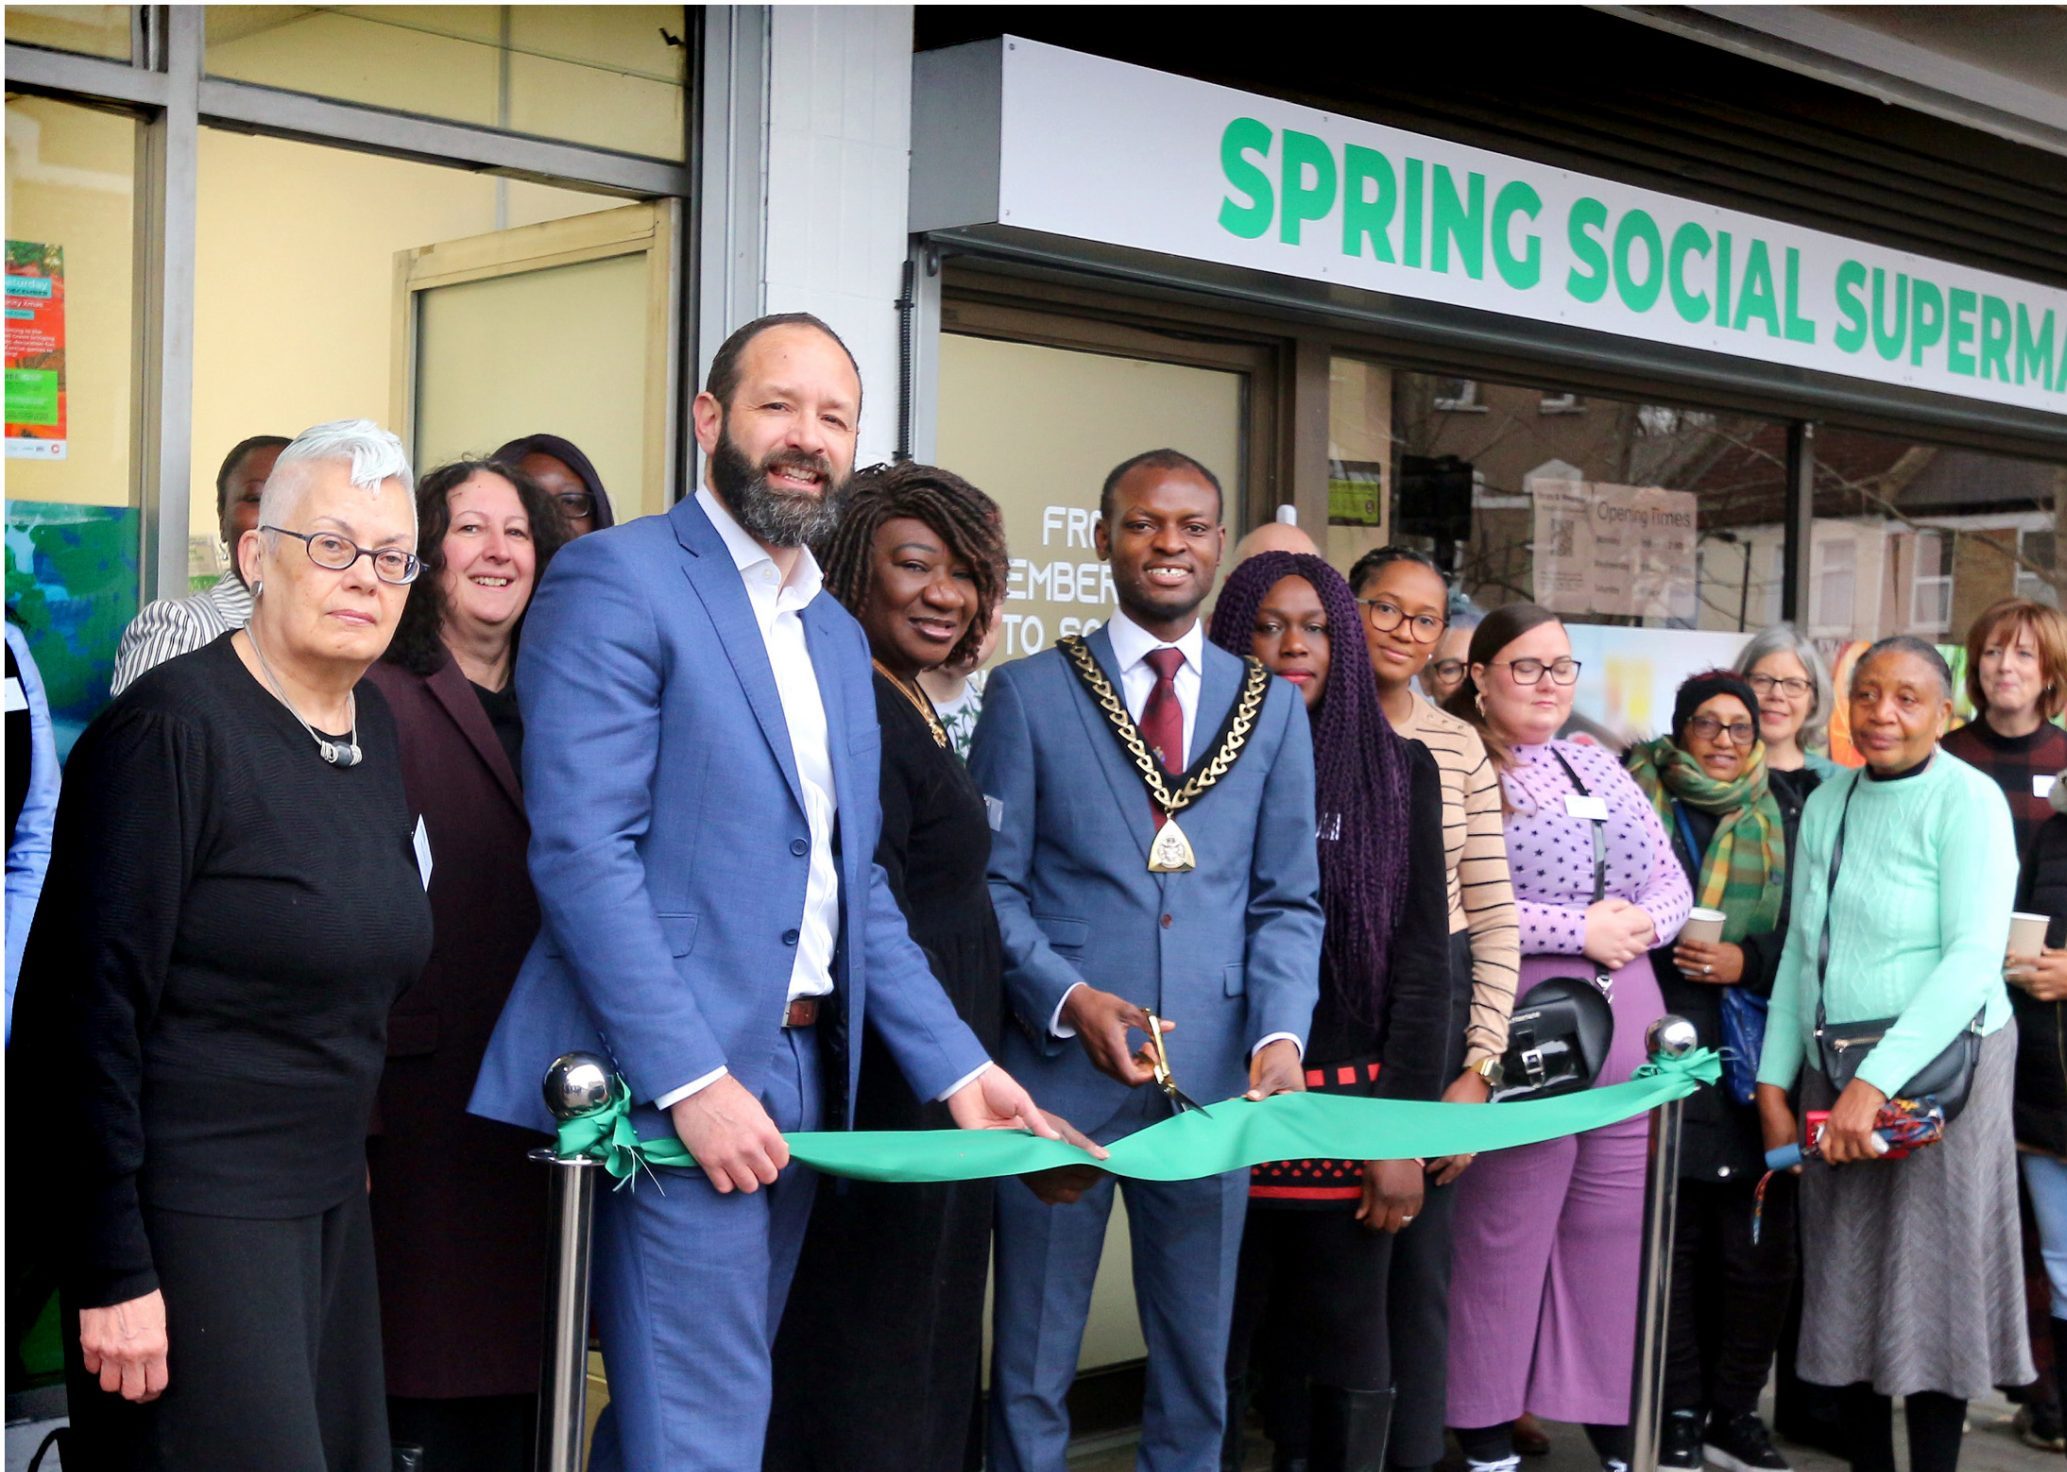 A crowd of people in front of the new premises watch as the mayor od southwark cuts the official opening ribbon